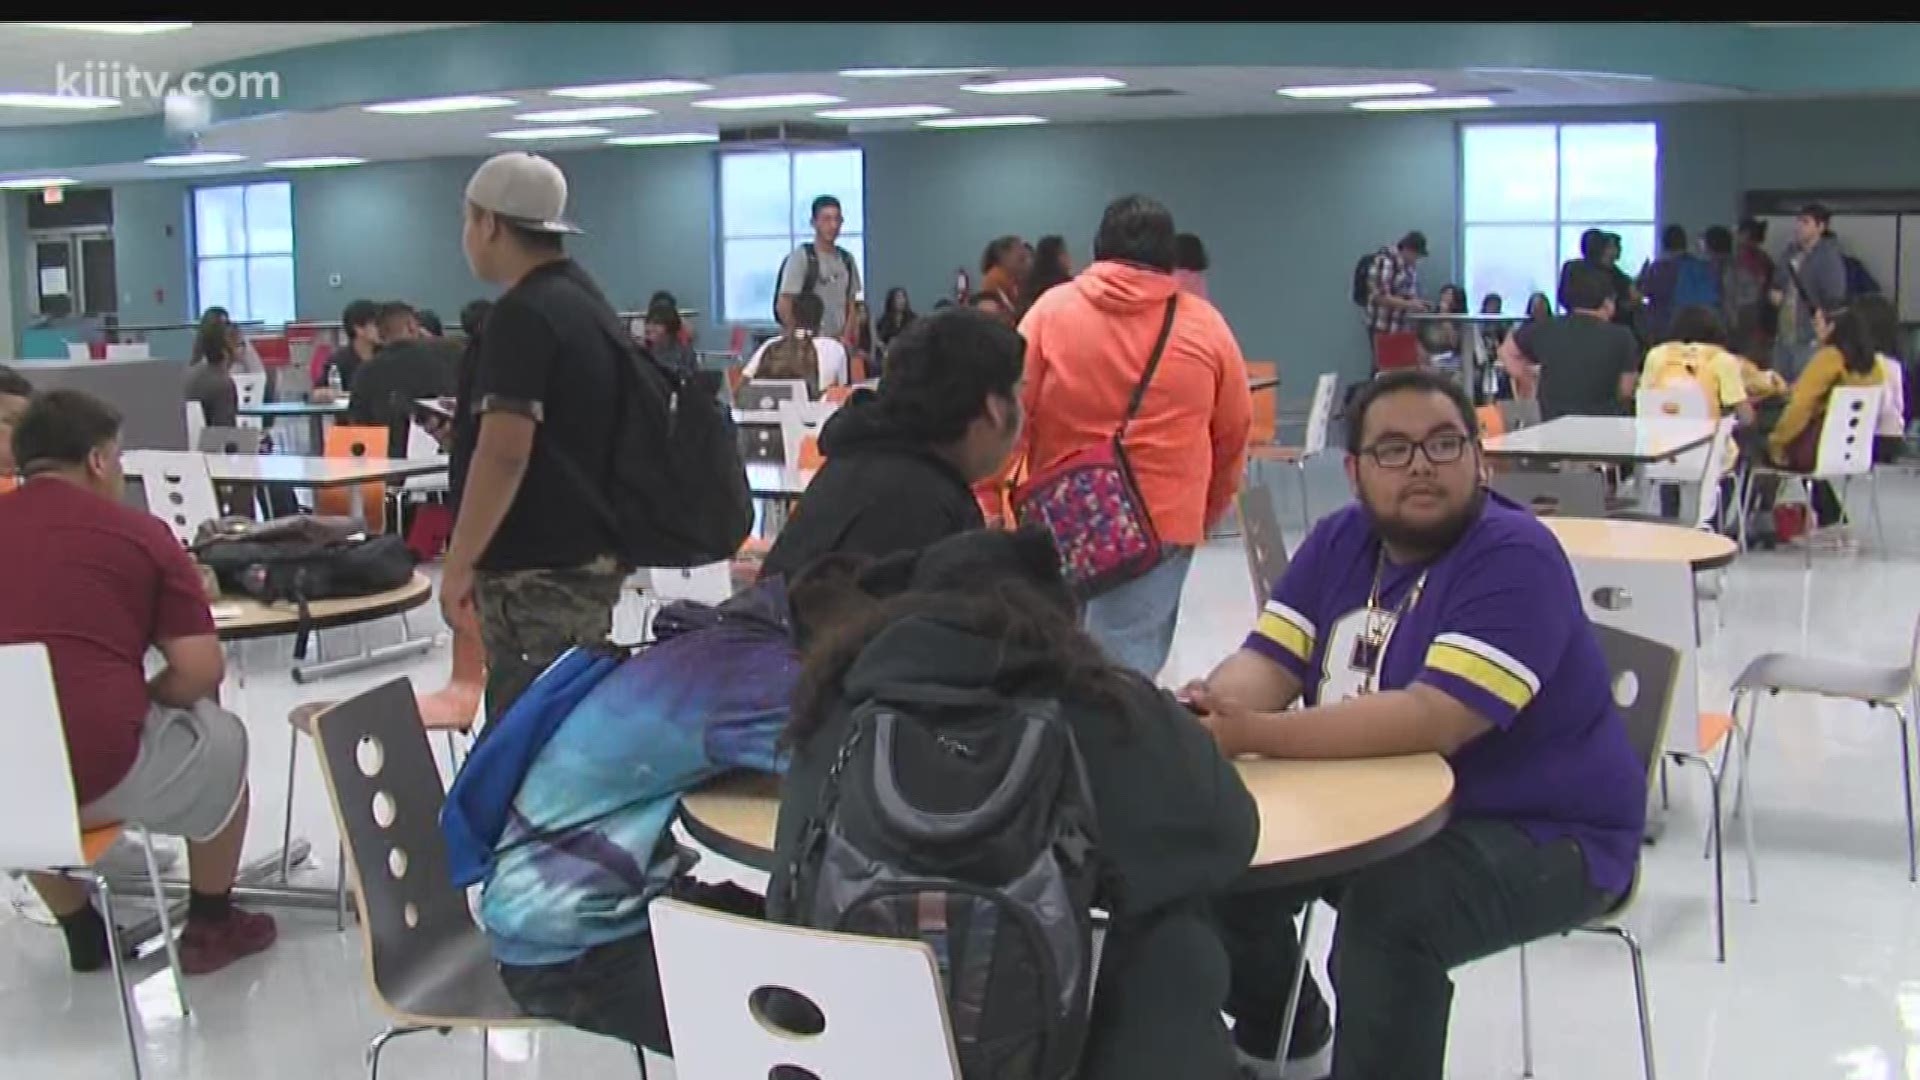 Students in Robstown were excited Monday morning to unveil their new Early College High School.